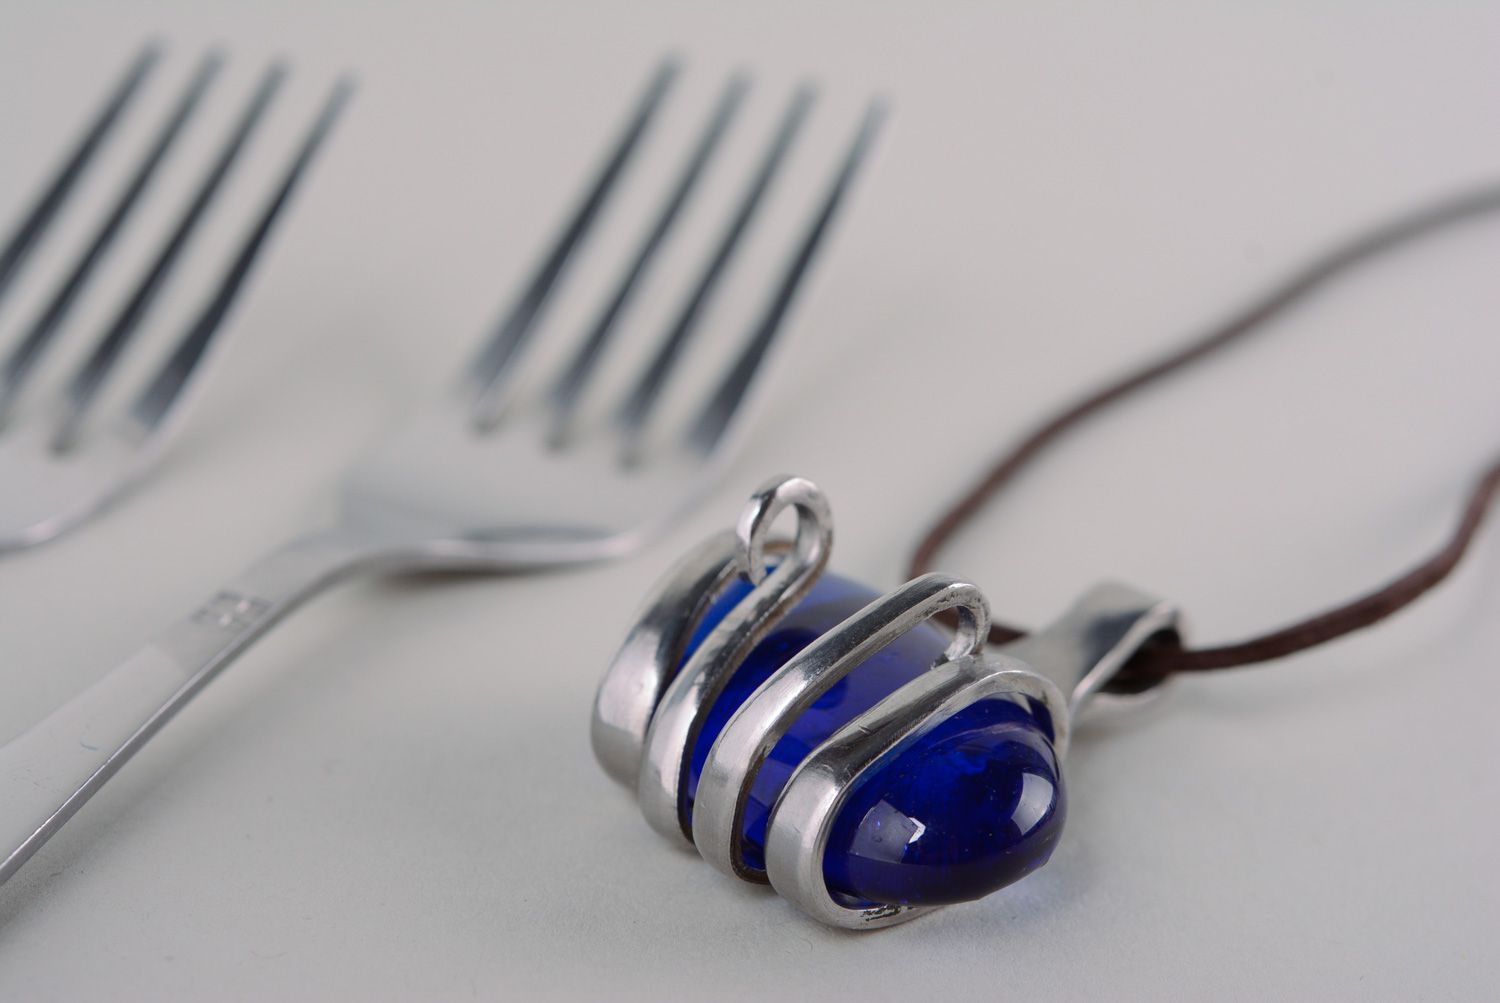 Homemade metal pendant made of cupronickel fork with blue artificial stone photo 1